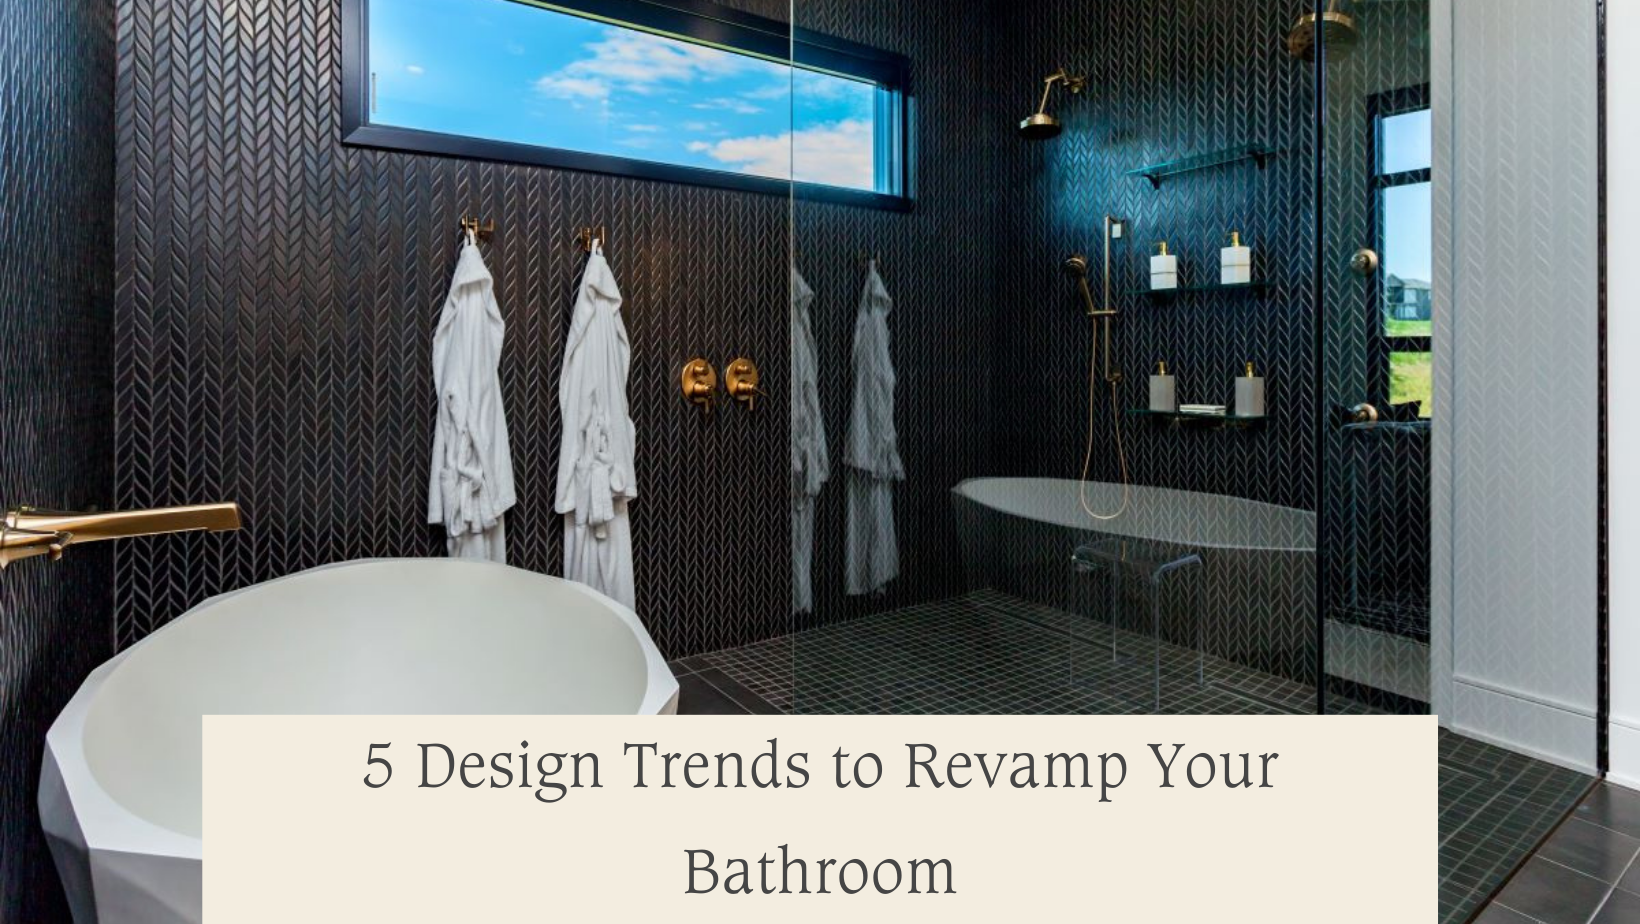 5 Design Trends to Revamp Your Bathroom